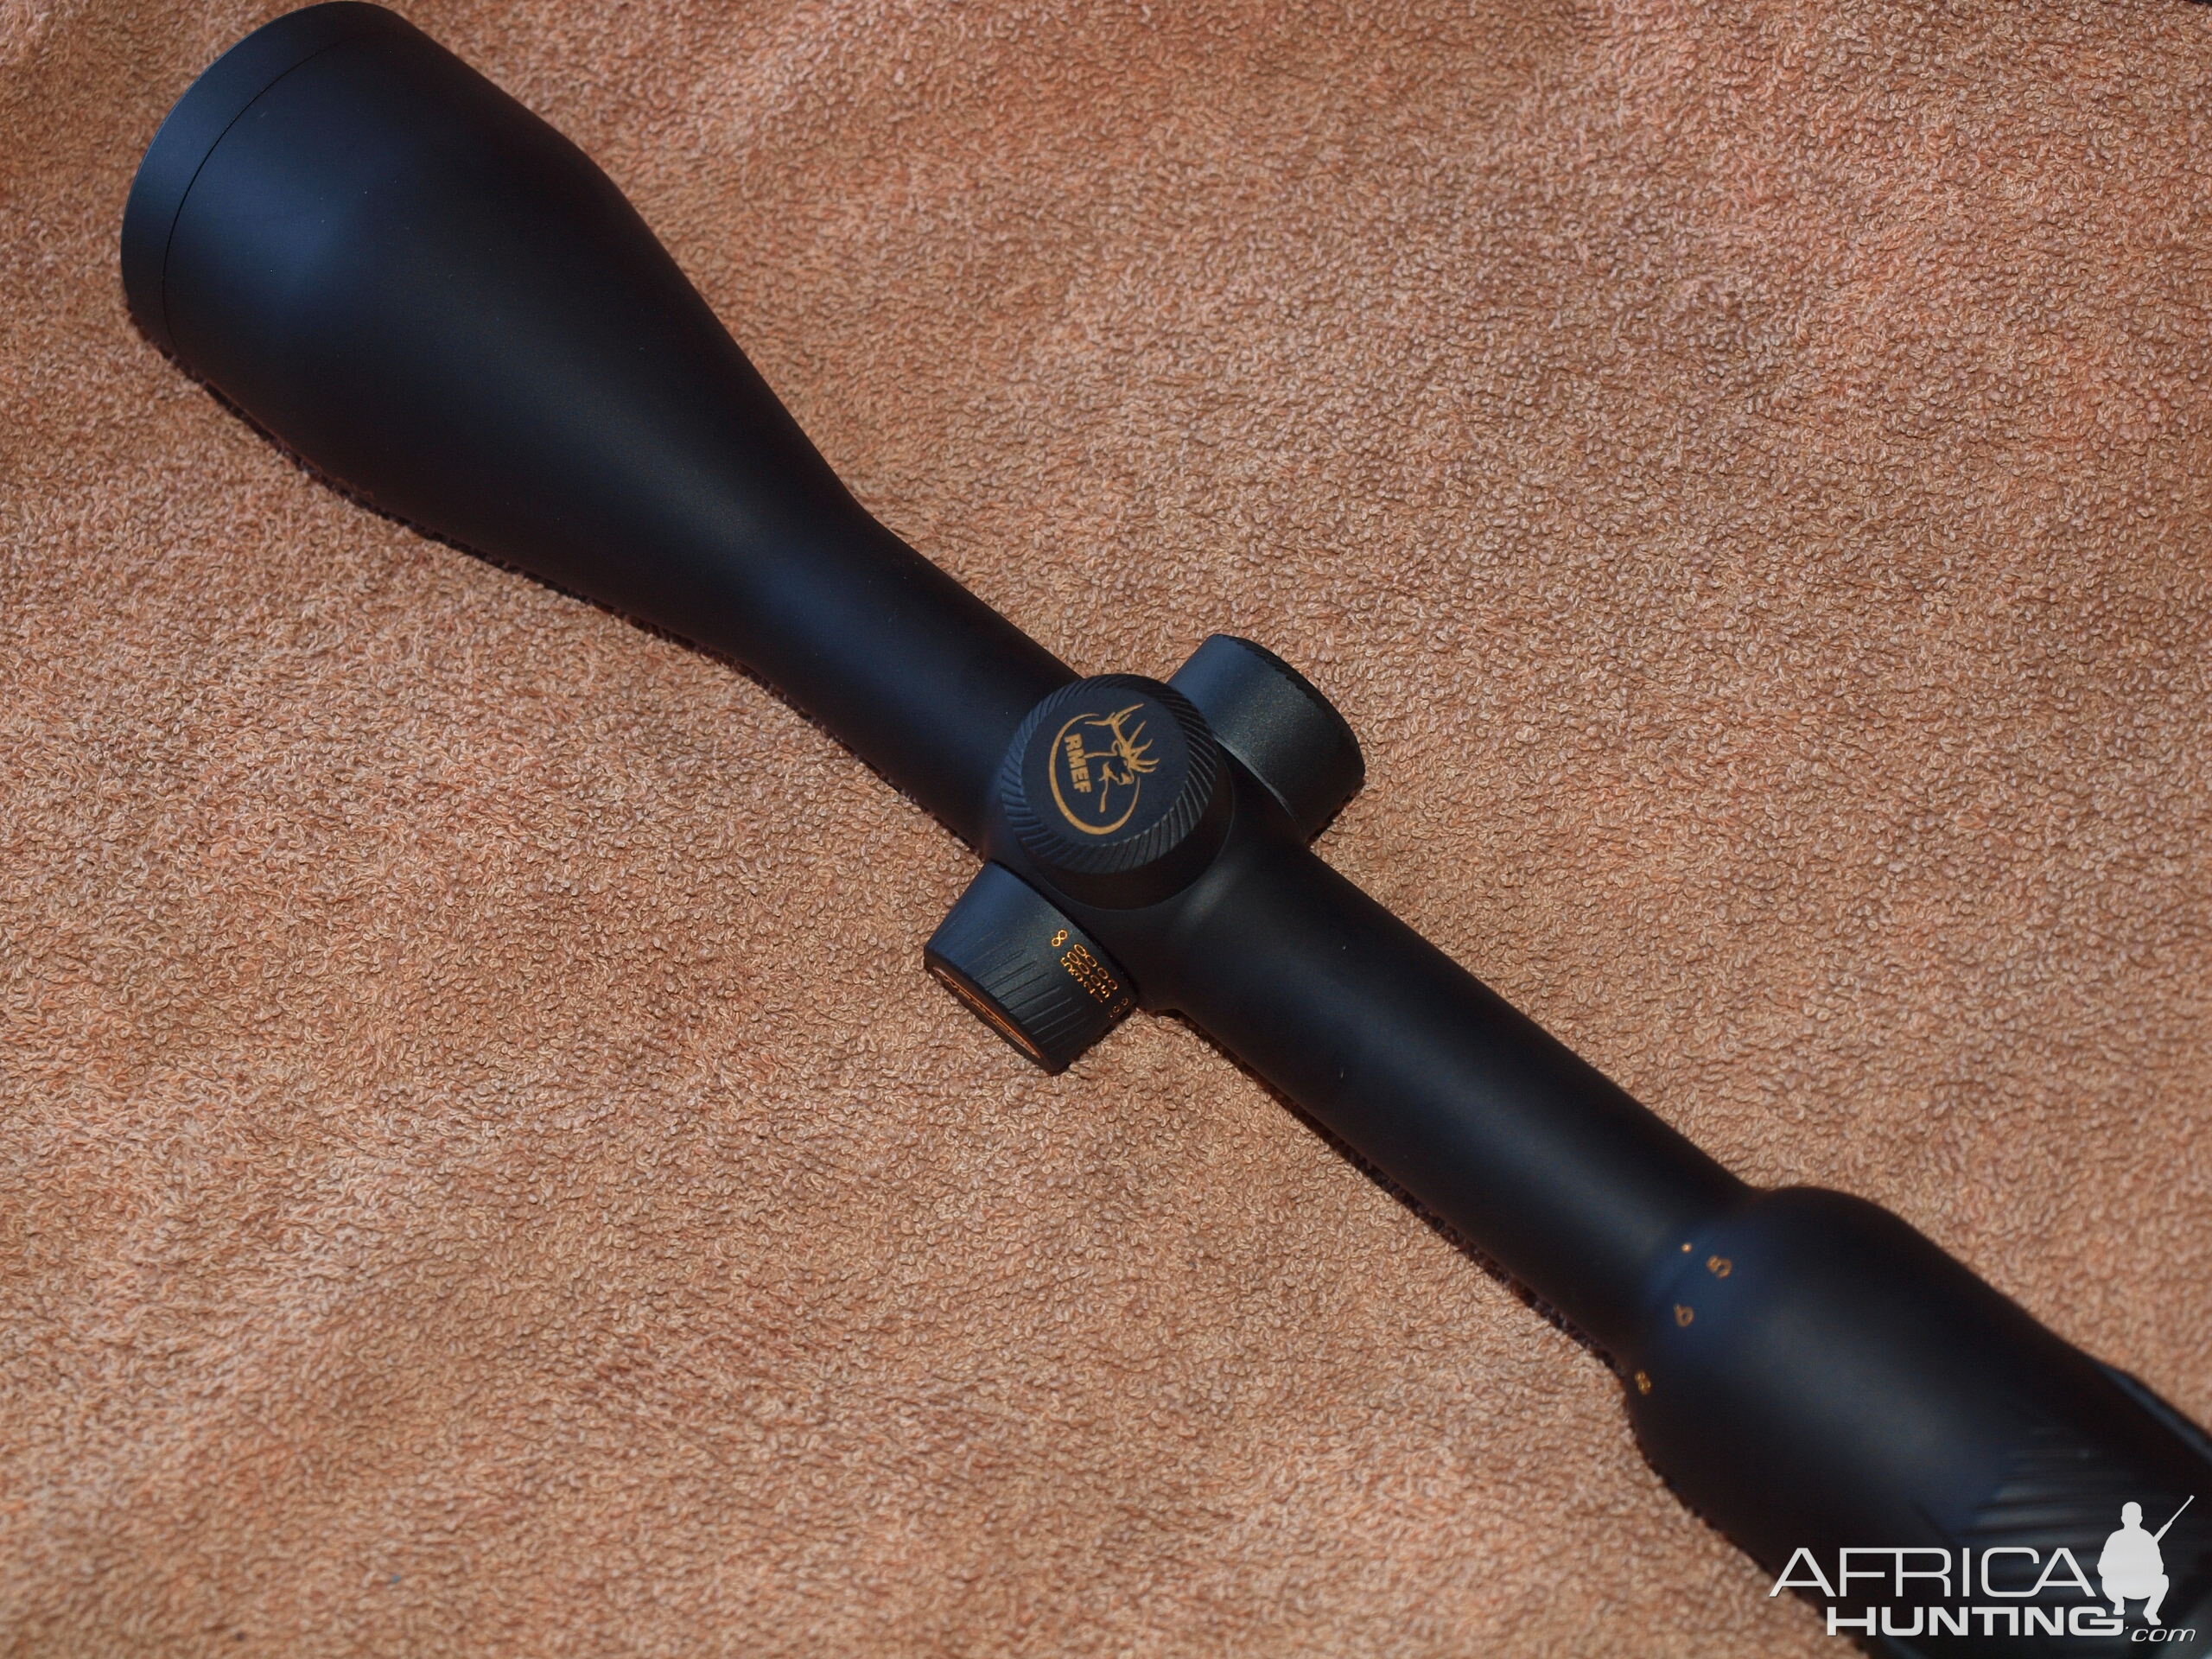 Rifle barrels and scopes for the building projects